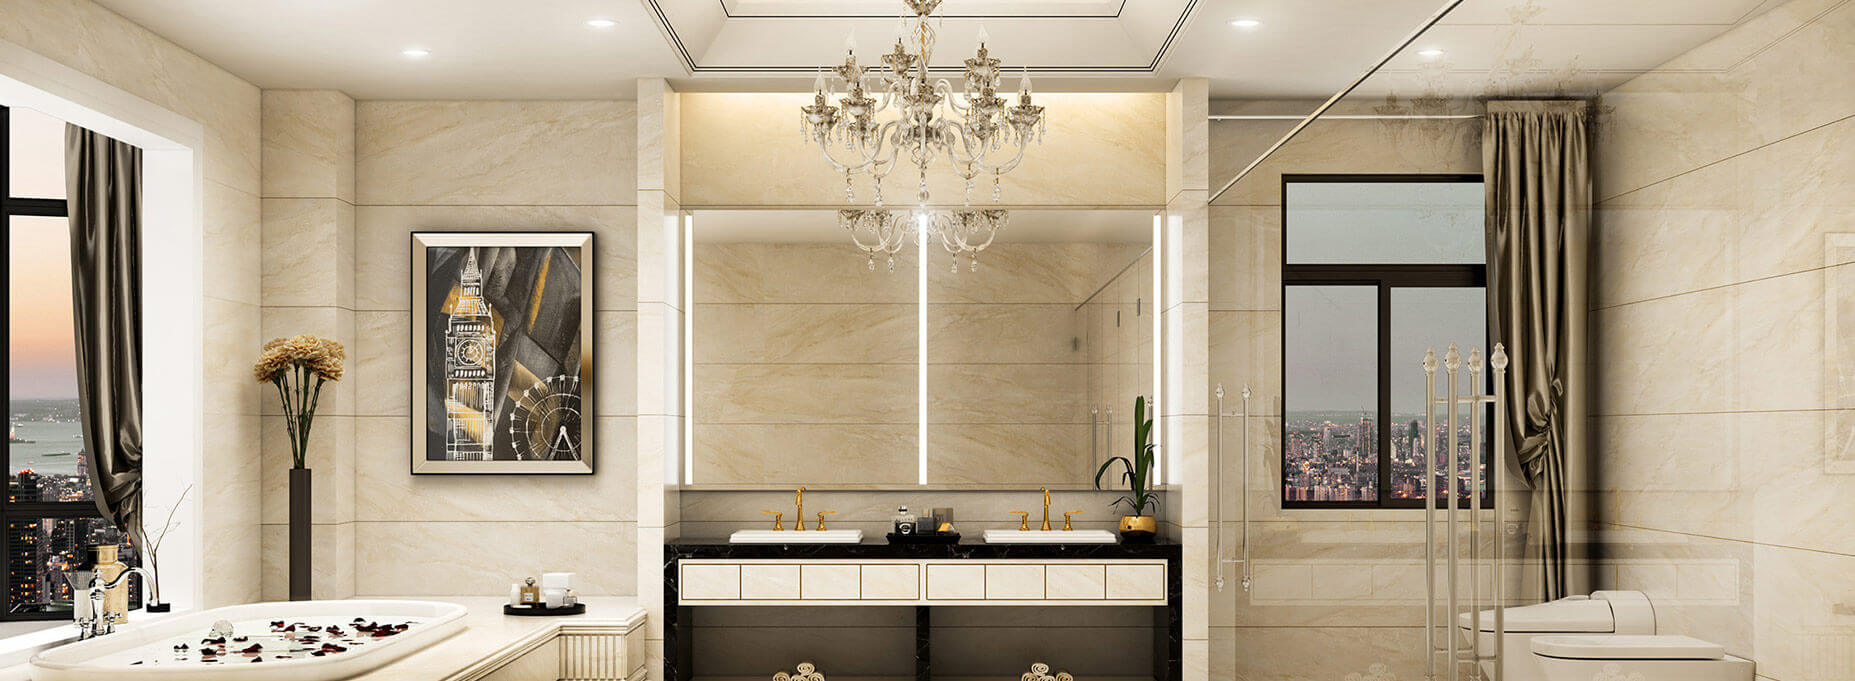 Two lighted mirrors in the center of a bathroom boasting its very sophisticated interior overlooking the city.